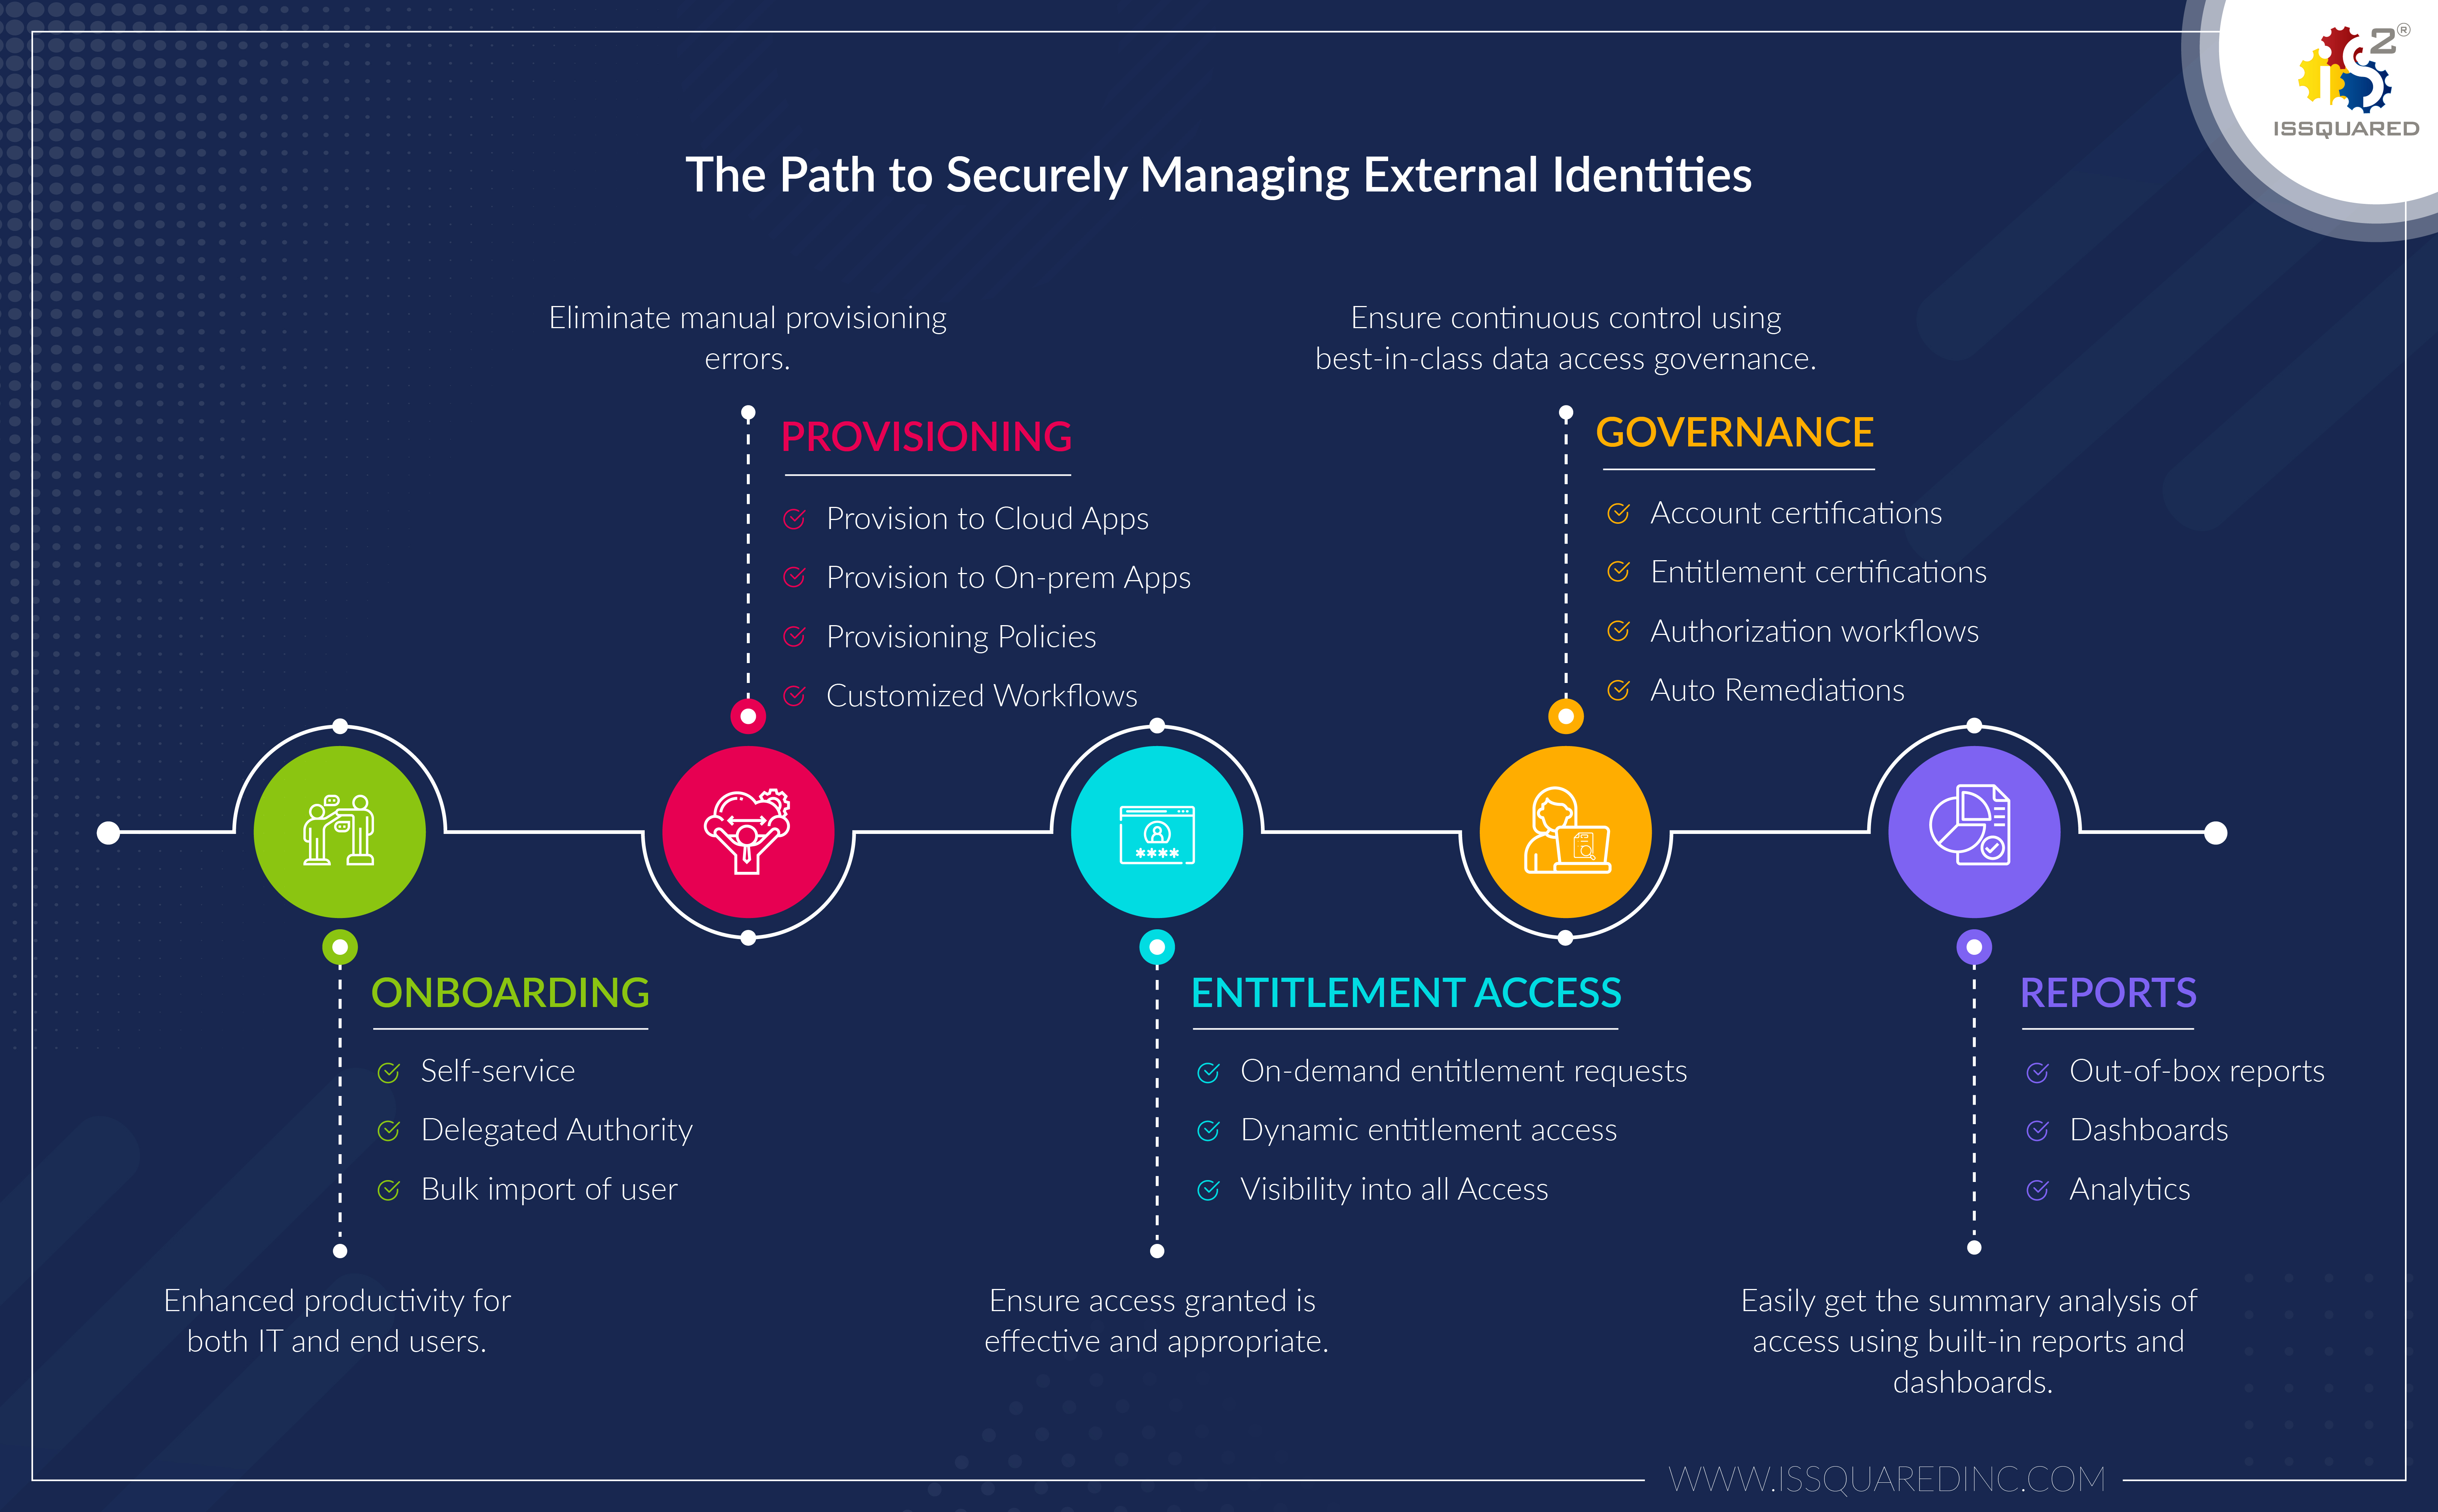 EIAG - Manage External Identities and their Access